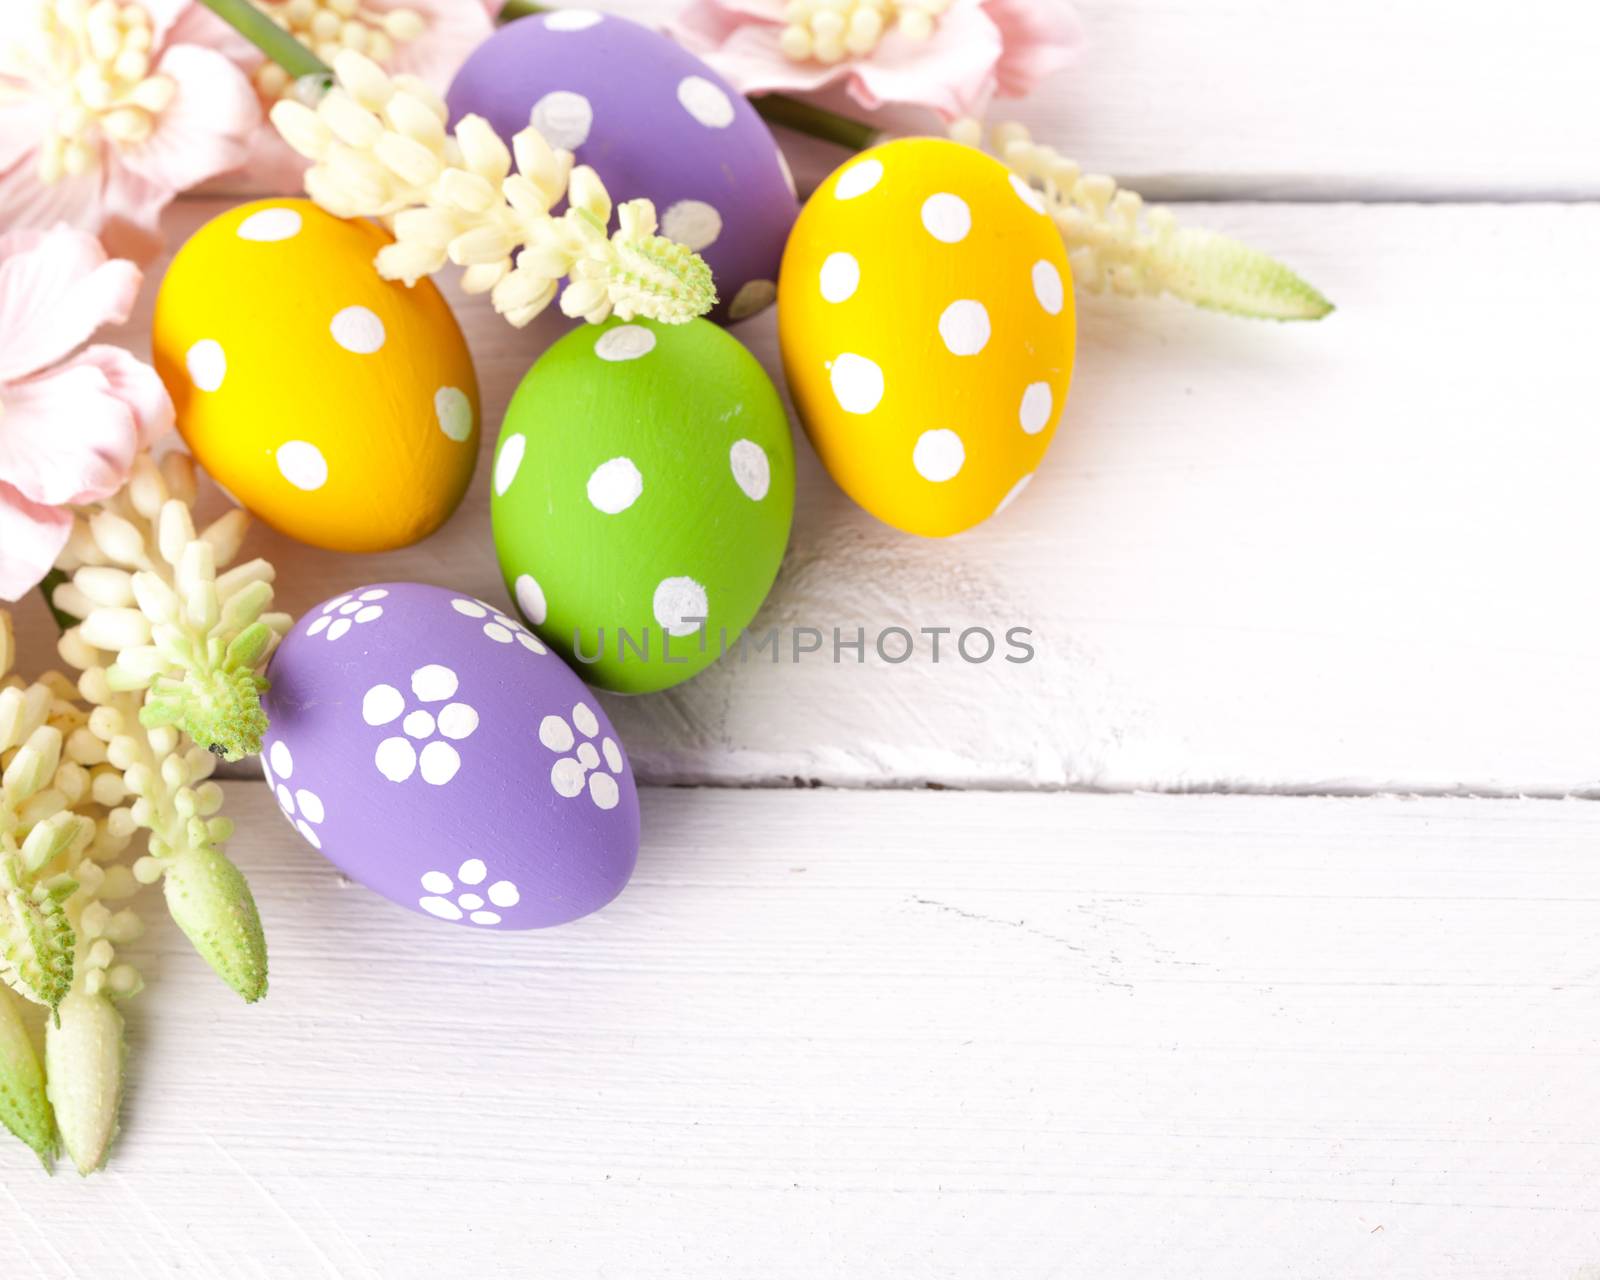 Colorful Easter Eggs by fotomaximum